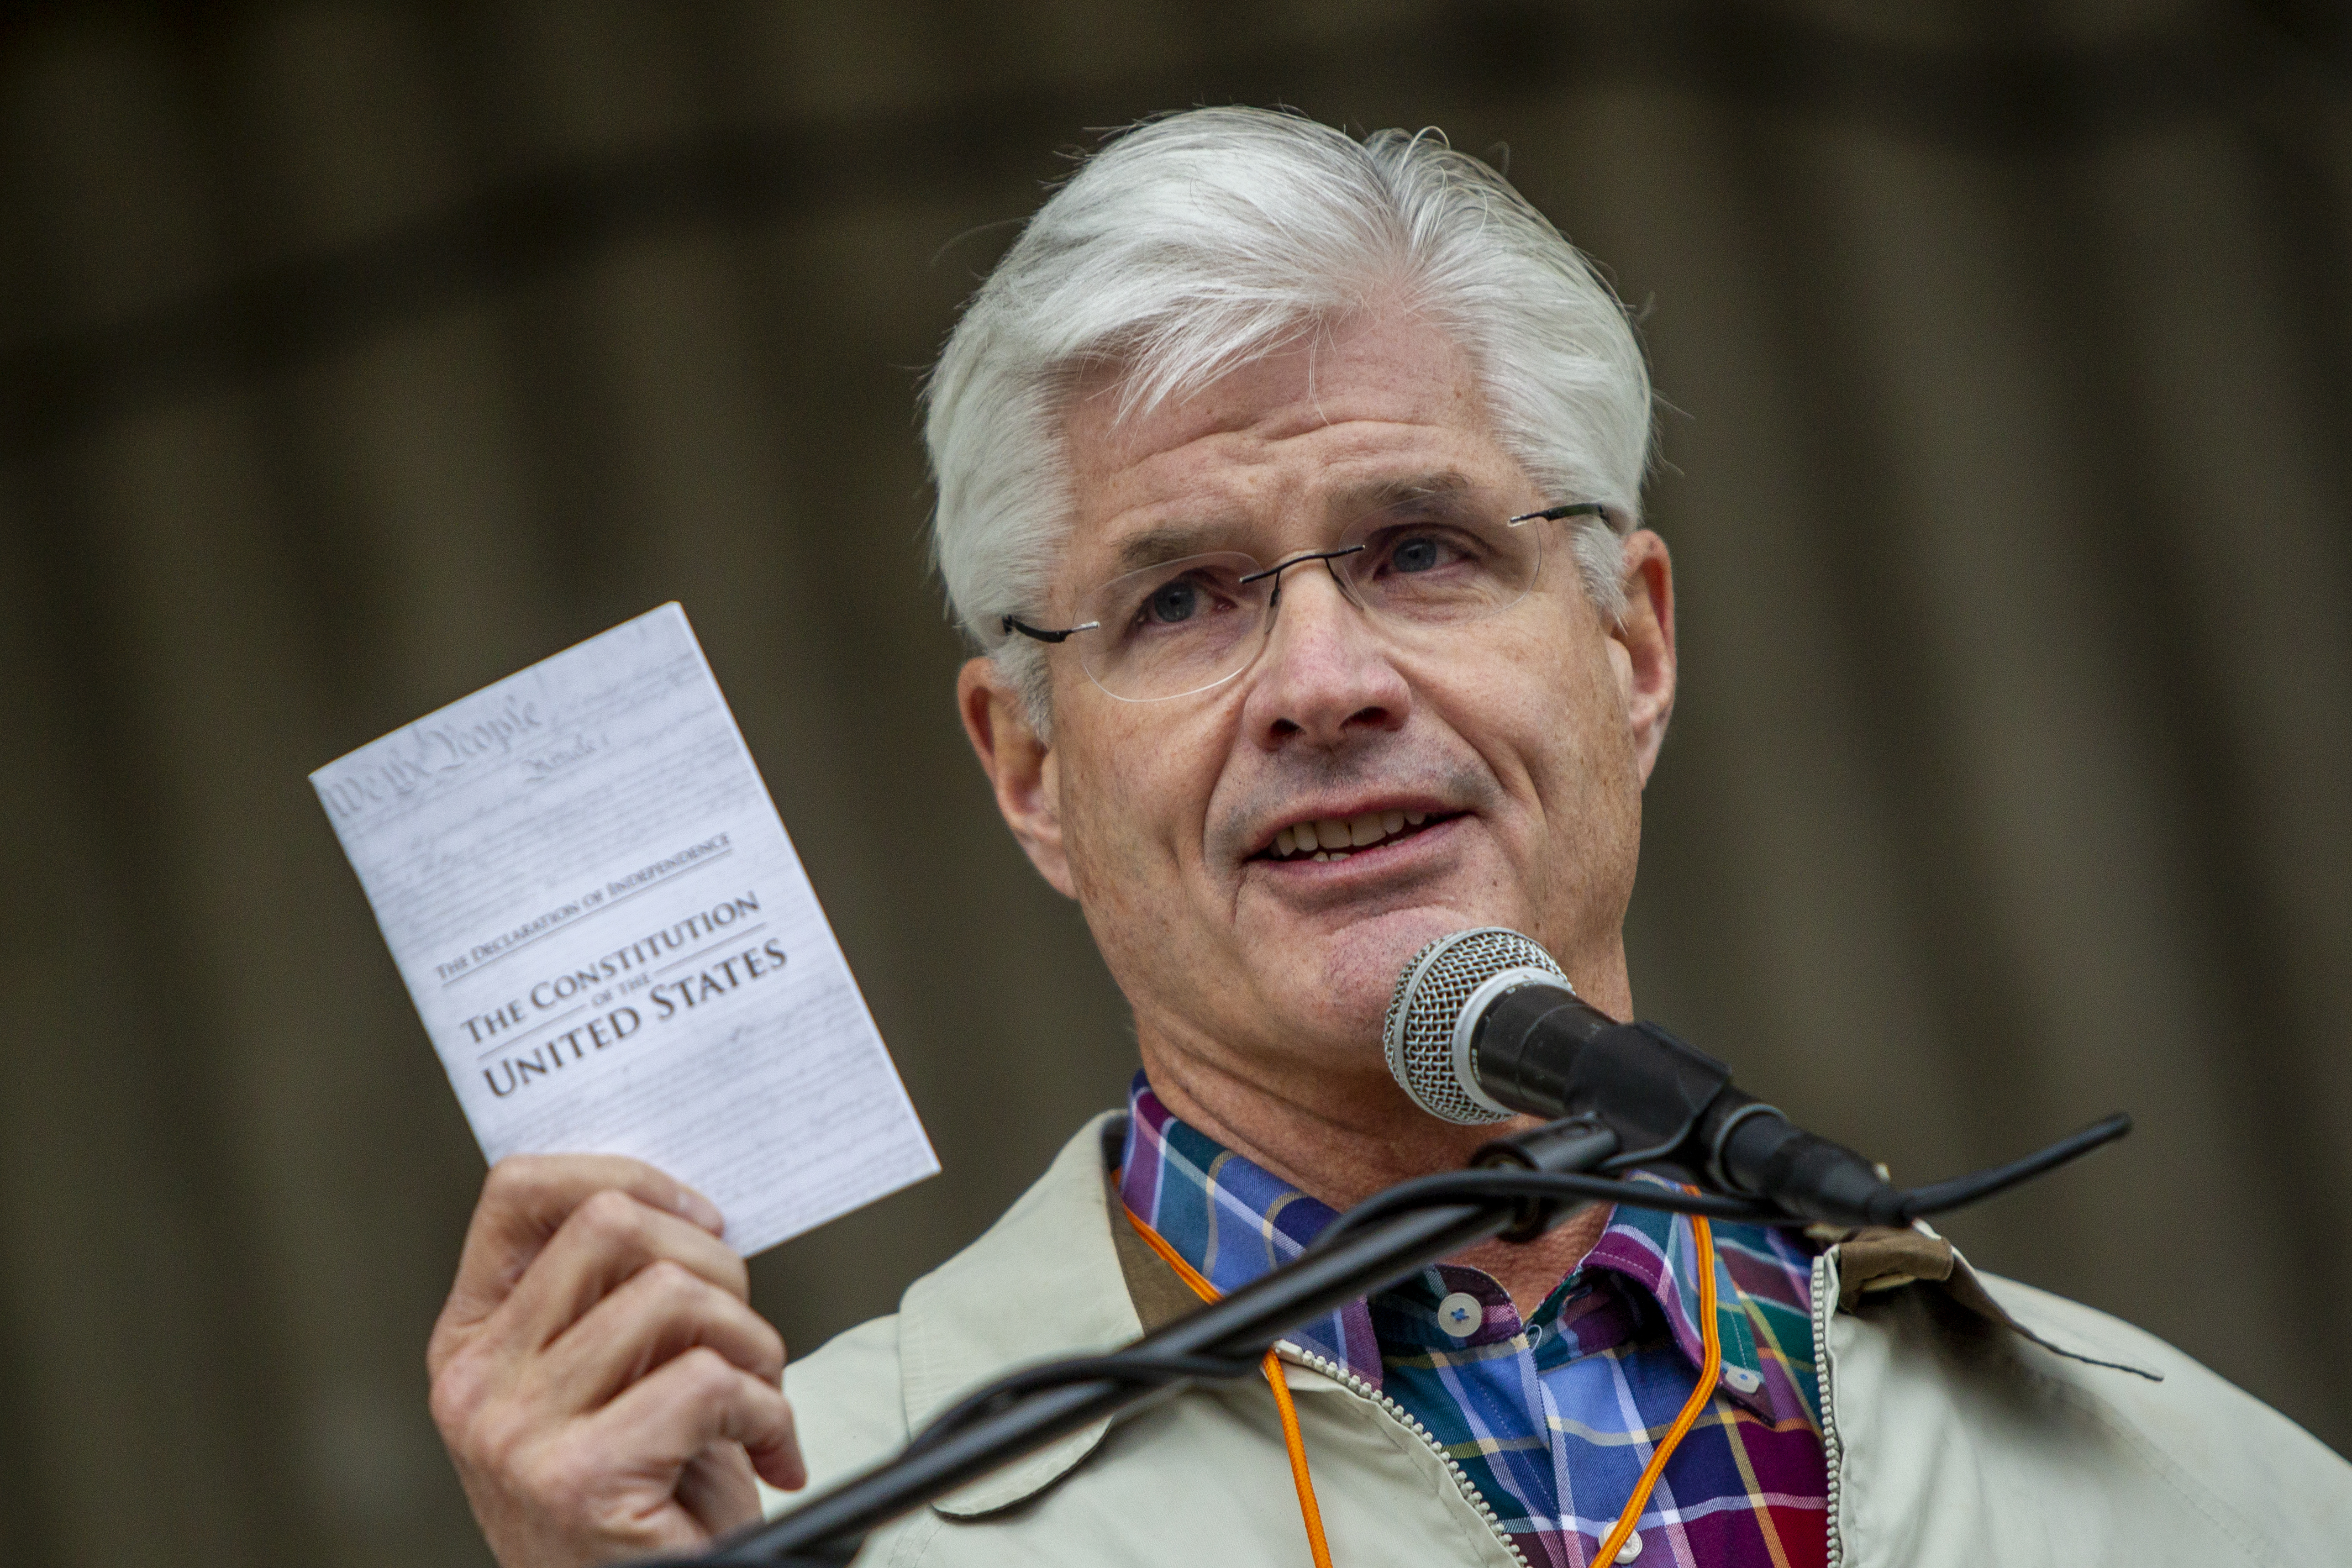 Senate Majority Leader Mike Shirkey, R-Clark Lake, speaks during the "American Patriot Rally-Sheriffs speak out" event at Rosa Parks Circle in downtown Grand Rapids on Monday, May 18, 2020. The crowd is protesting against Gov. Gretchen Whitmer's stay-at-home order. (Cory Morse | MLive.com)